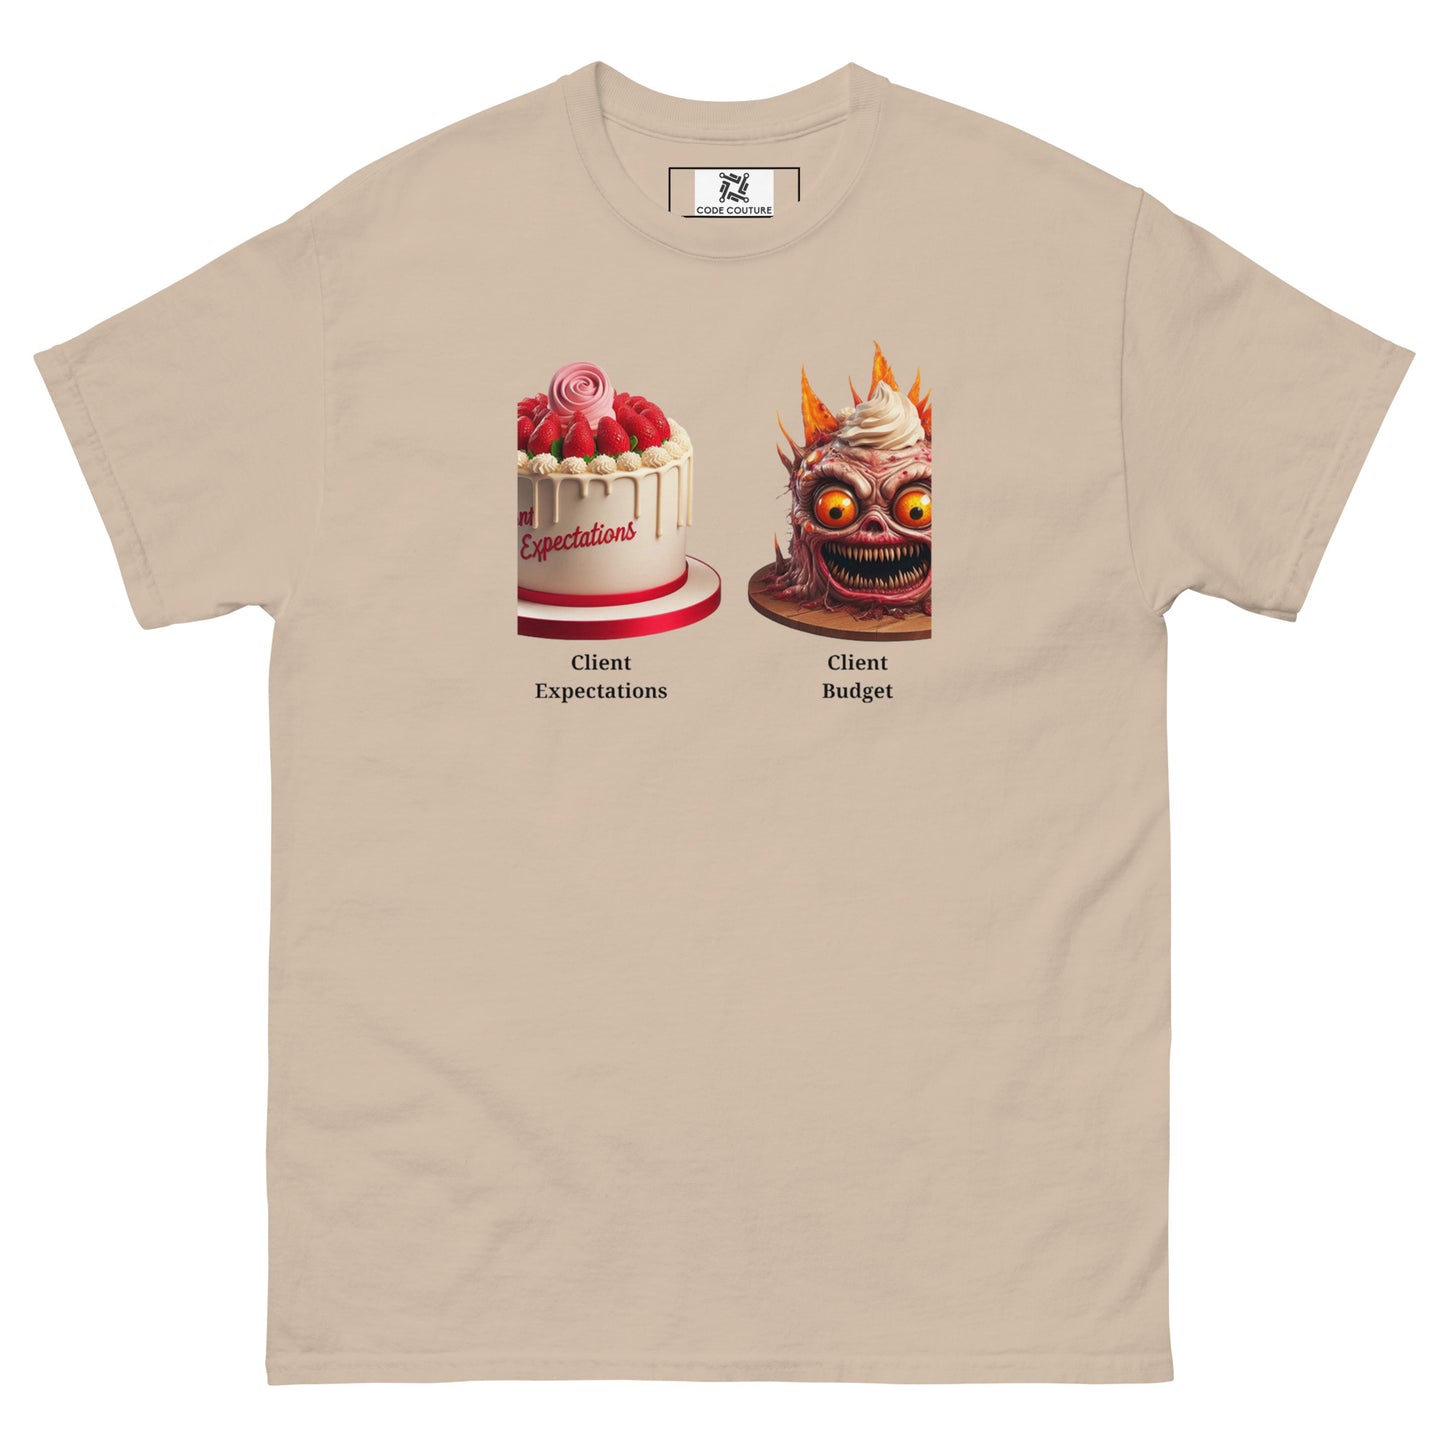 Client Budget vs. Expectations tee